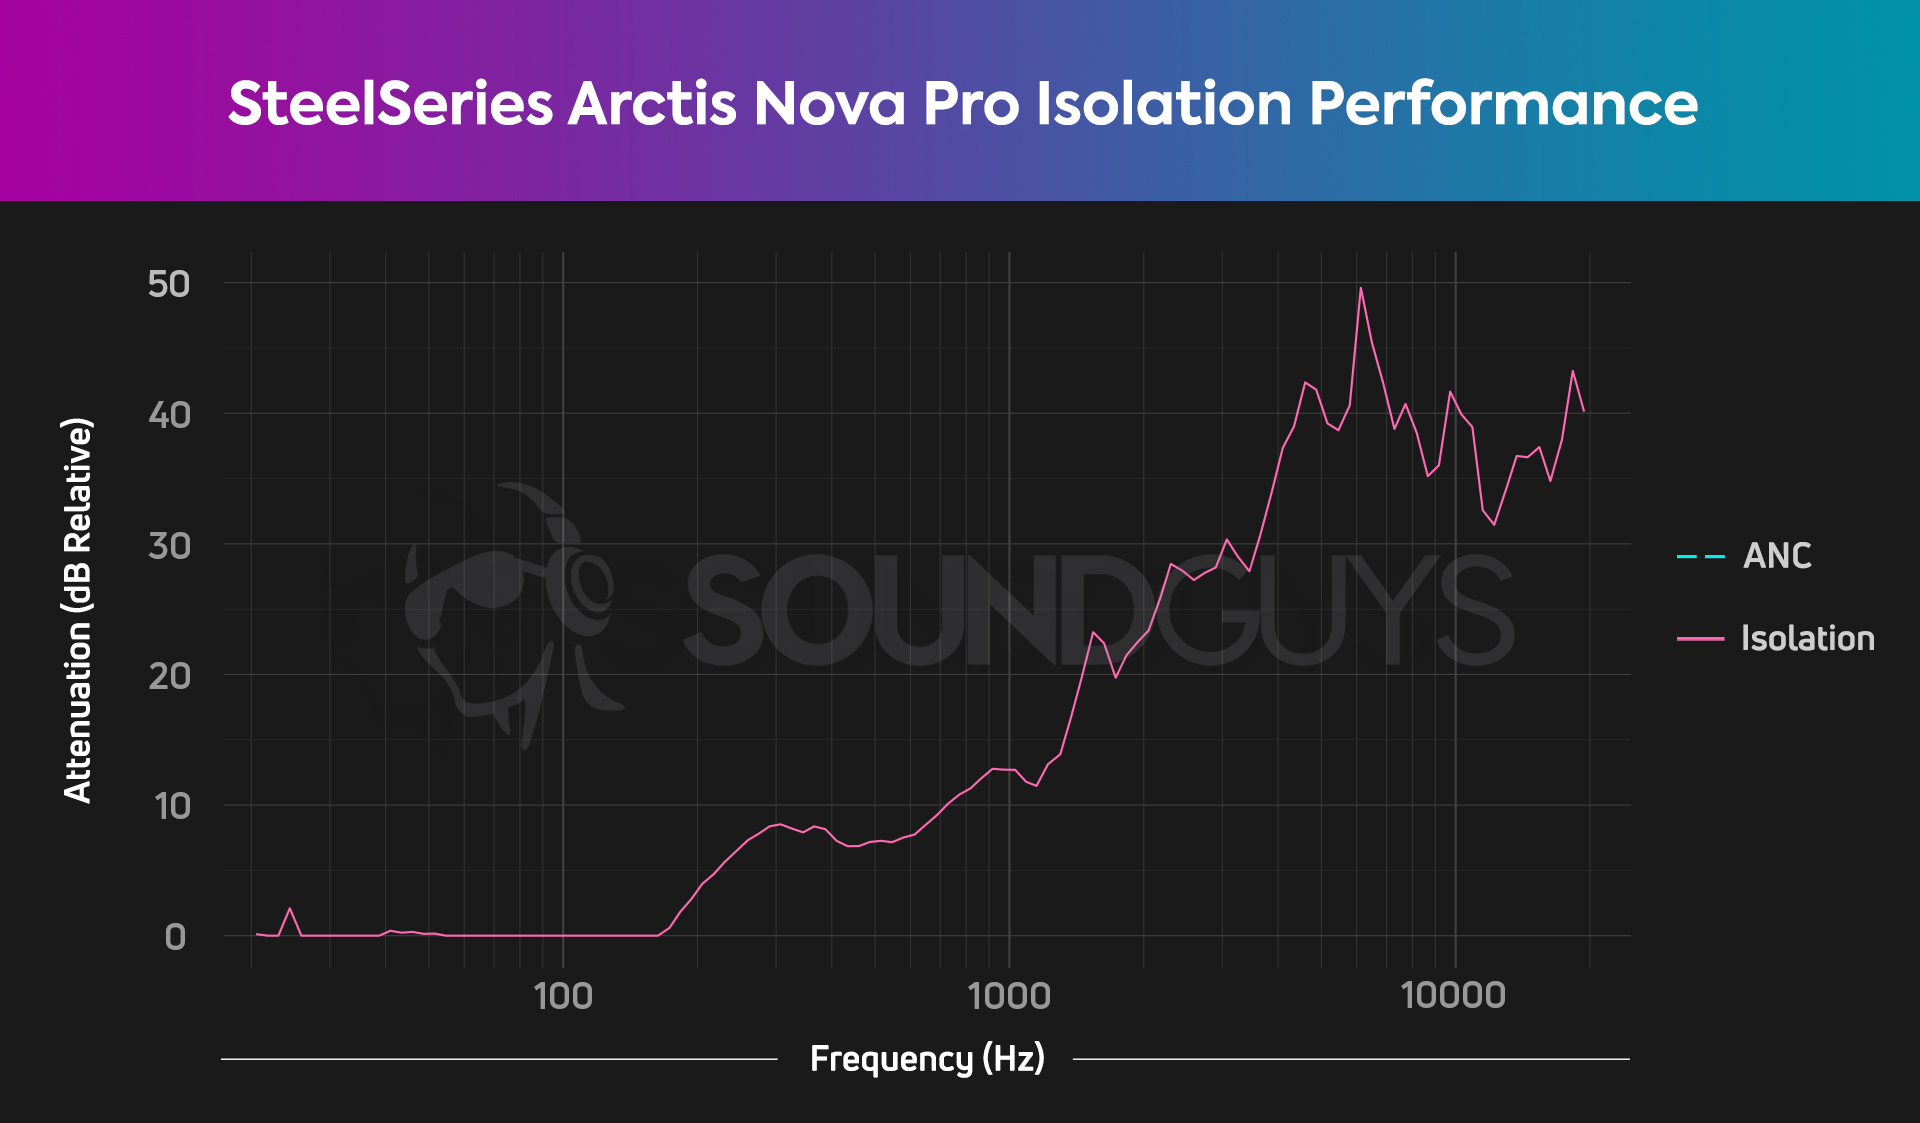 An isolation chart for the SteelSeries Arctis Nova Pro gaming headset, which shows good attenuation for a gaming headset